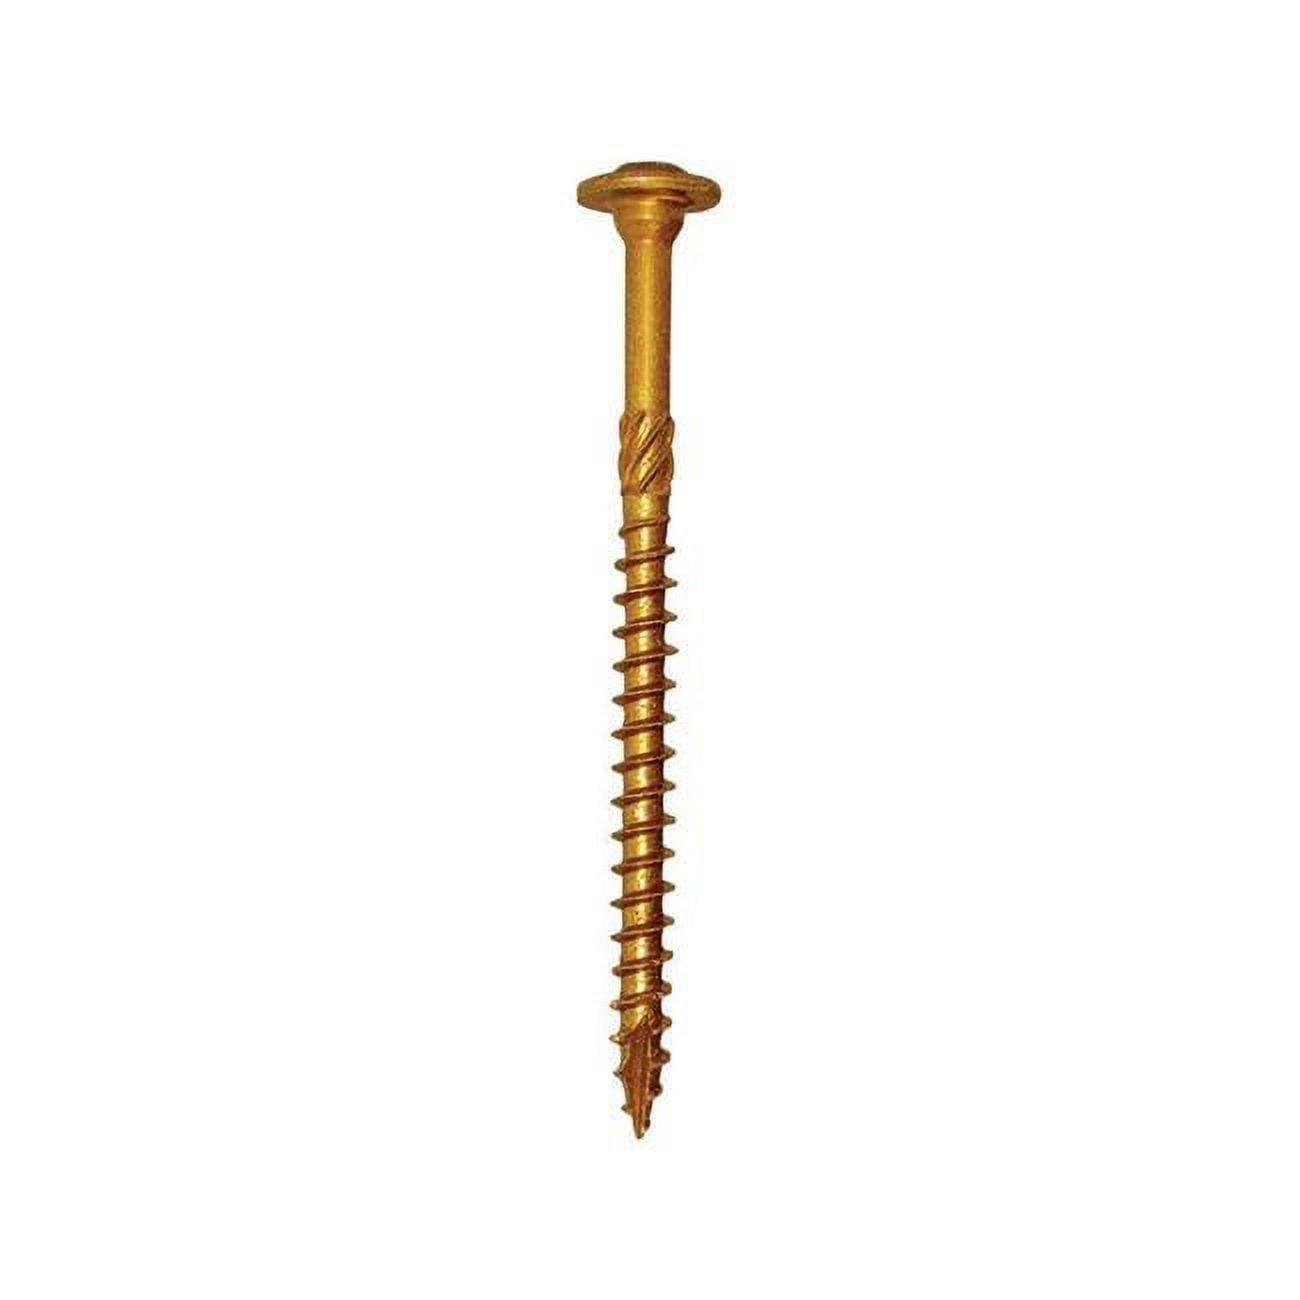 Picture of GRK Fasteners 5913645 Star Self Tapping 0.31 in. Dia. x 6 in. Yellow Zinc Construction Drilling Screws